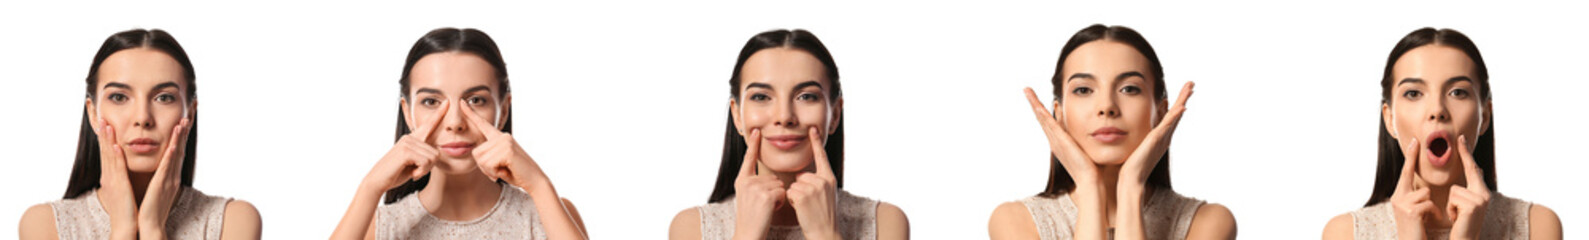 Set of young woman doing face building exercises against white background